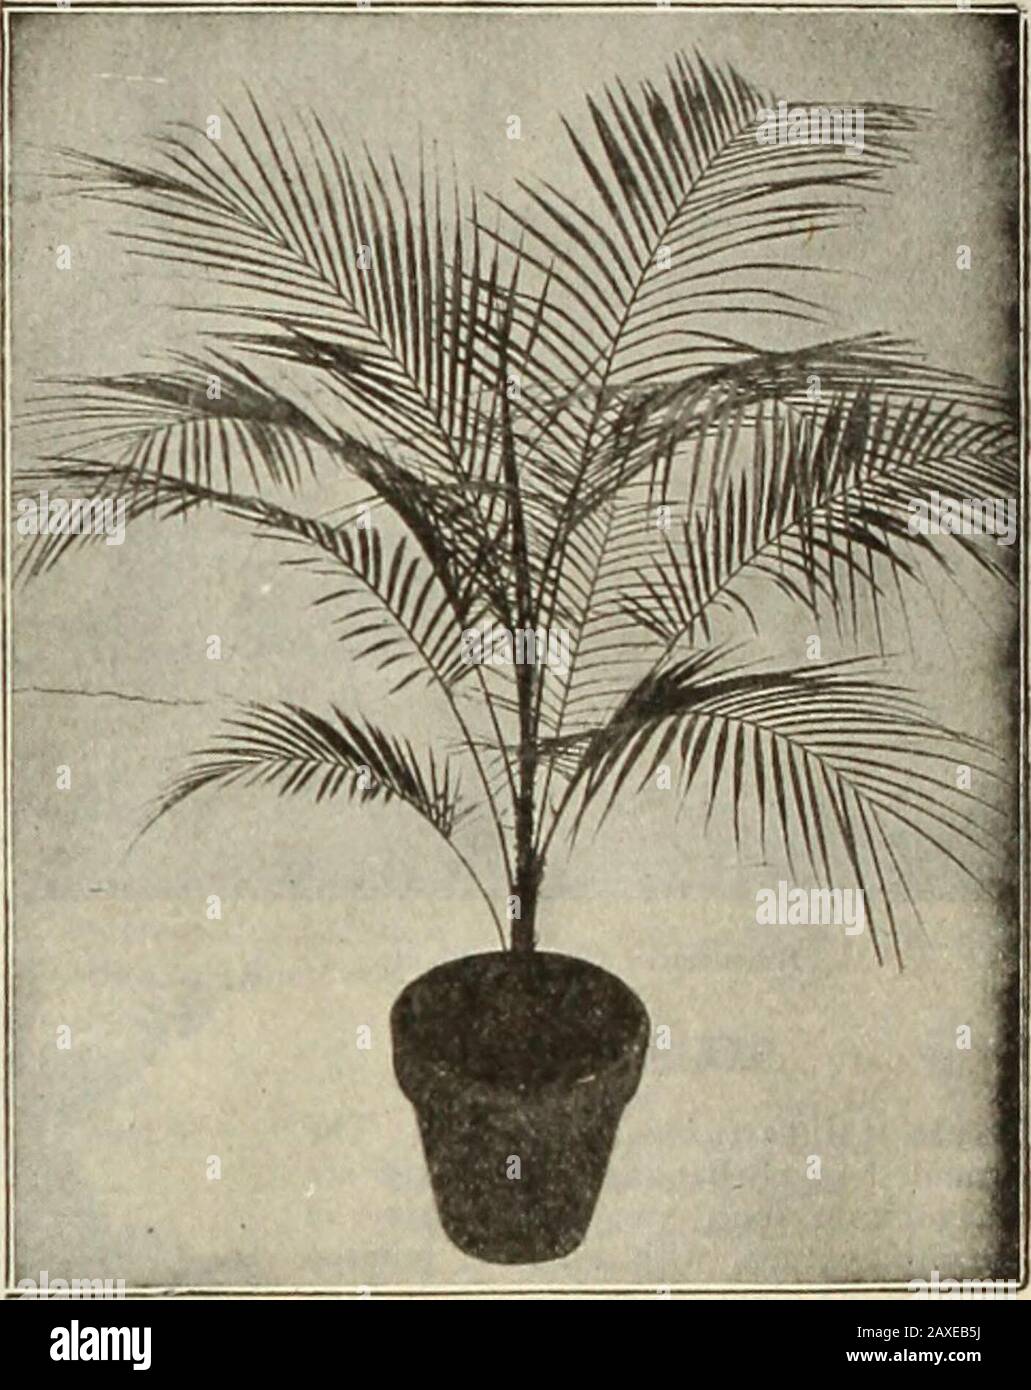 Dreer's garden book : seventy-fourth annual edition 1912 . to 36 inches high, $5.00 each.Cocos /Vlarie Rose and Schizophylla. Both interesting, strong-growing species, useful in Florida and California, where they can be planted out. $1.50 each. Cocos Weudeliana. Deckeria Nobilis. A very rare Palm, with narrow, divided pinnae of klight green color, the stems closely protected with long, light-colorecspines; requires a close, high temperature. 3-inch pots, $2.50 each. Dsmonorops Palembanicus (C«?»nw»). A tropical s|)ecies delighting in a high, moist atmosphere, finely feathered dark green foliag Stock Photo